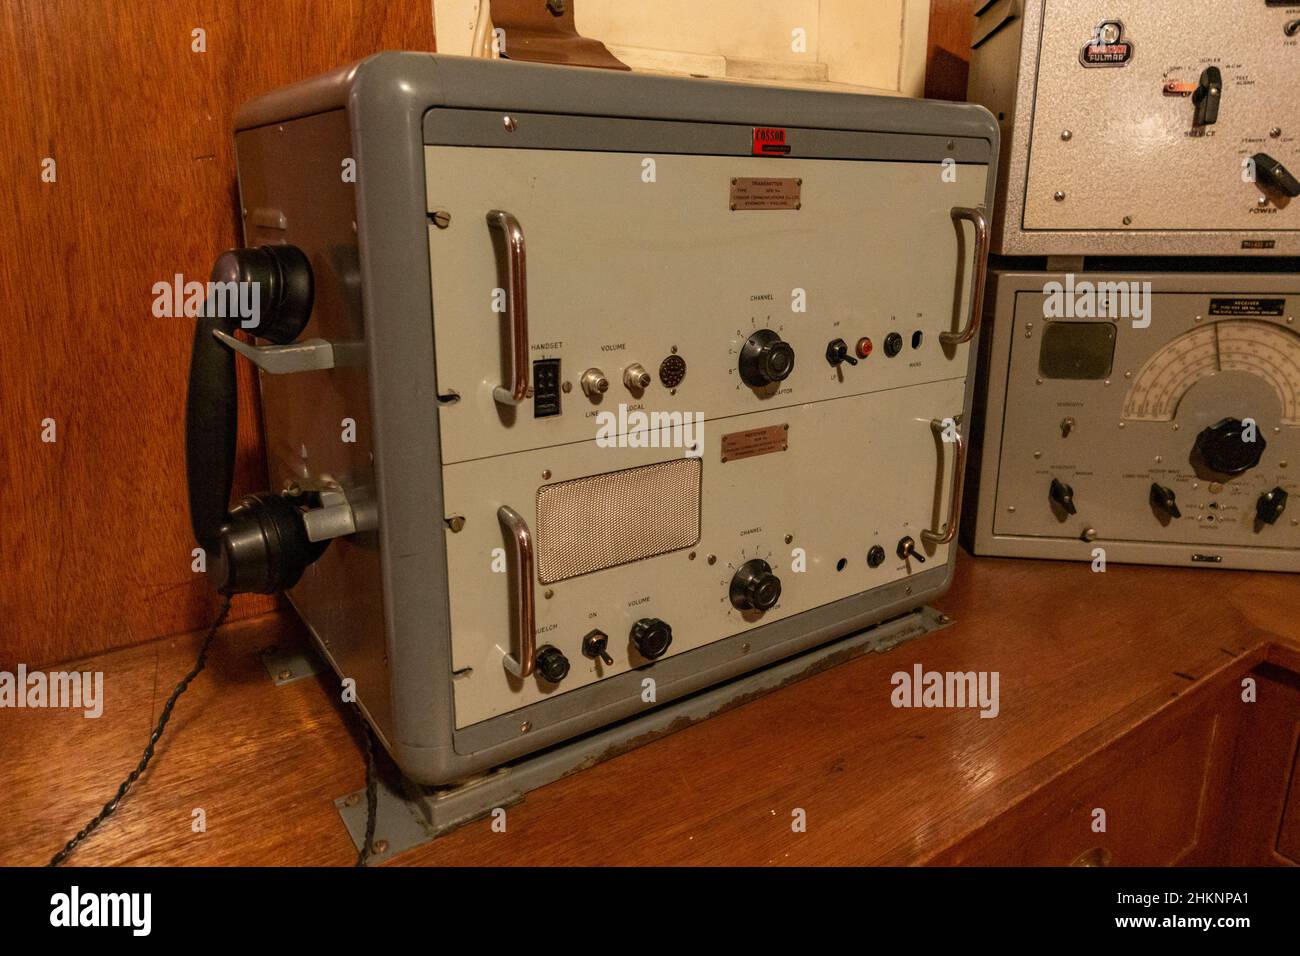 A Cossor trasnsmitter in a recreated radio room in the Grimsby Fishing Heritage Centre, Grimsby, UK. Stock Photo